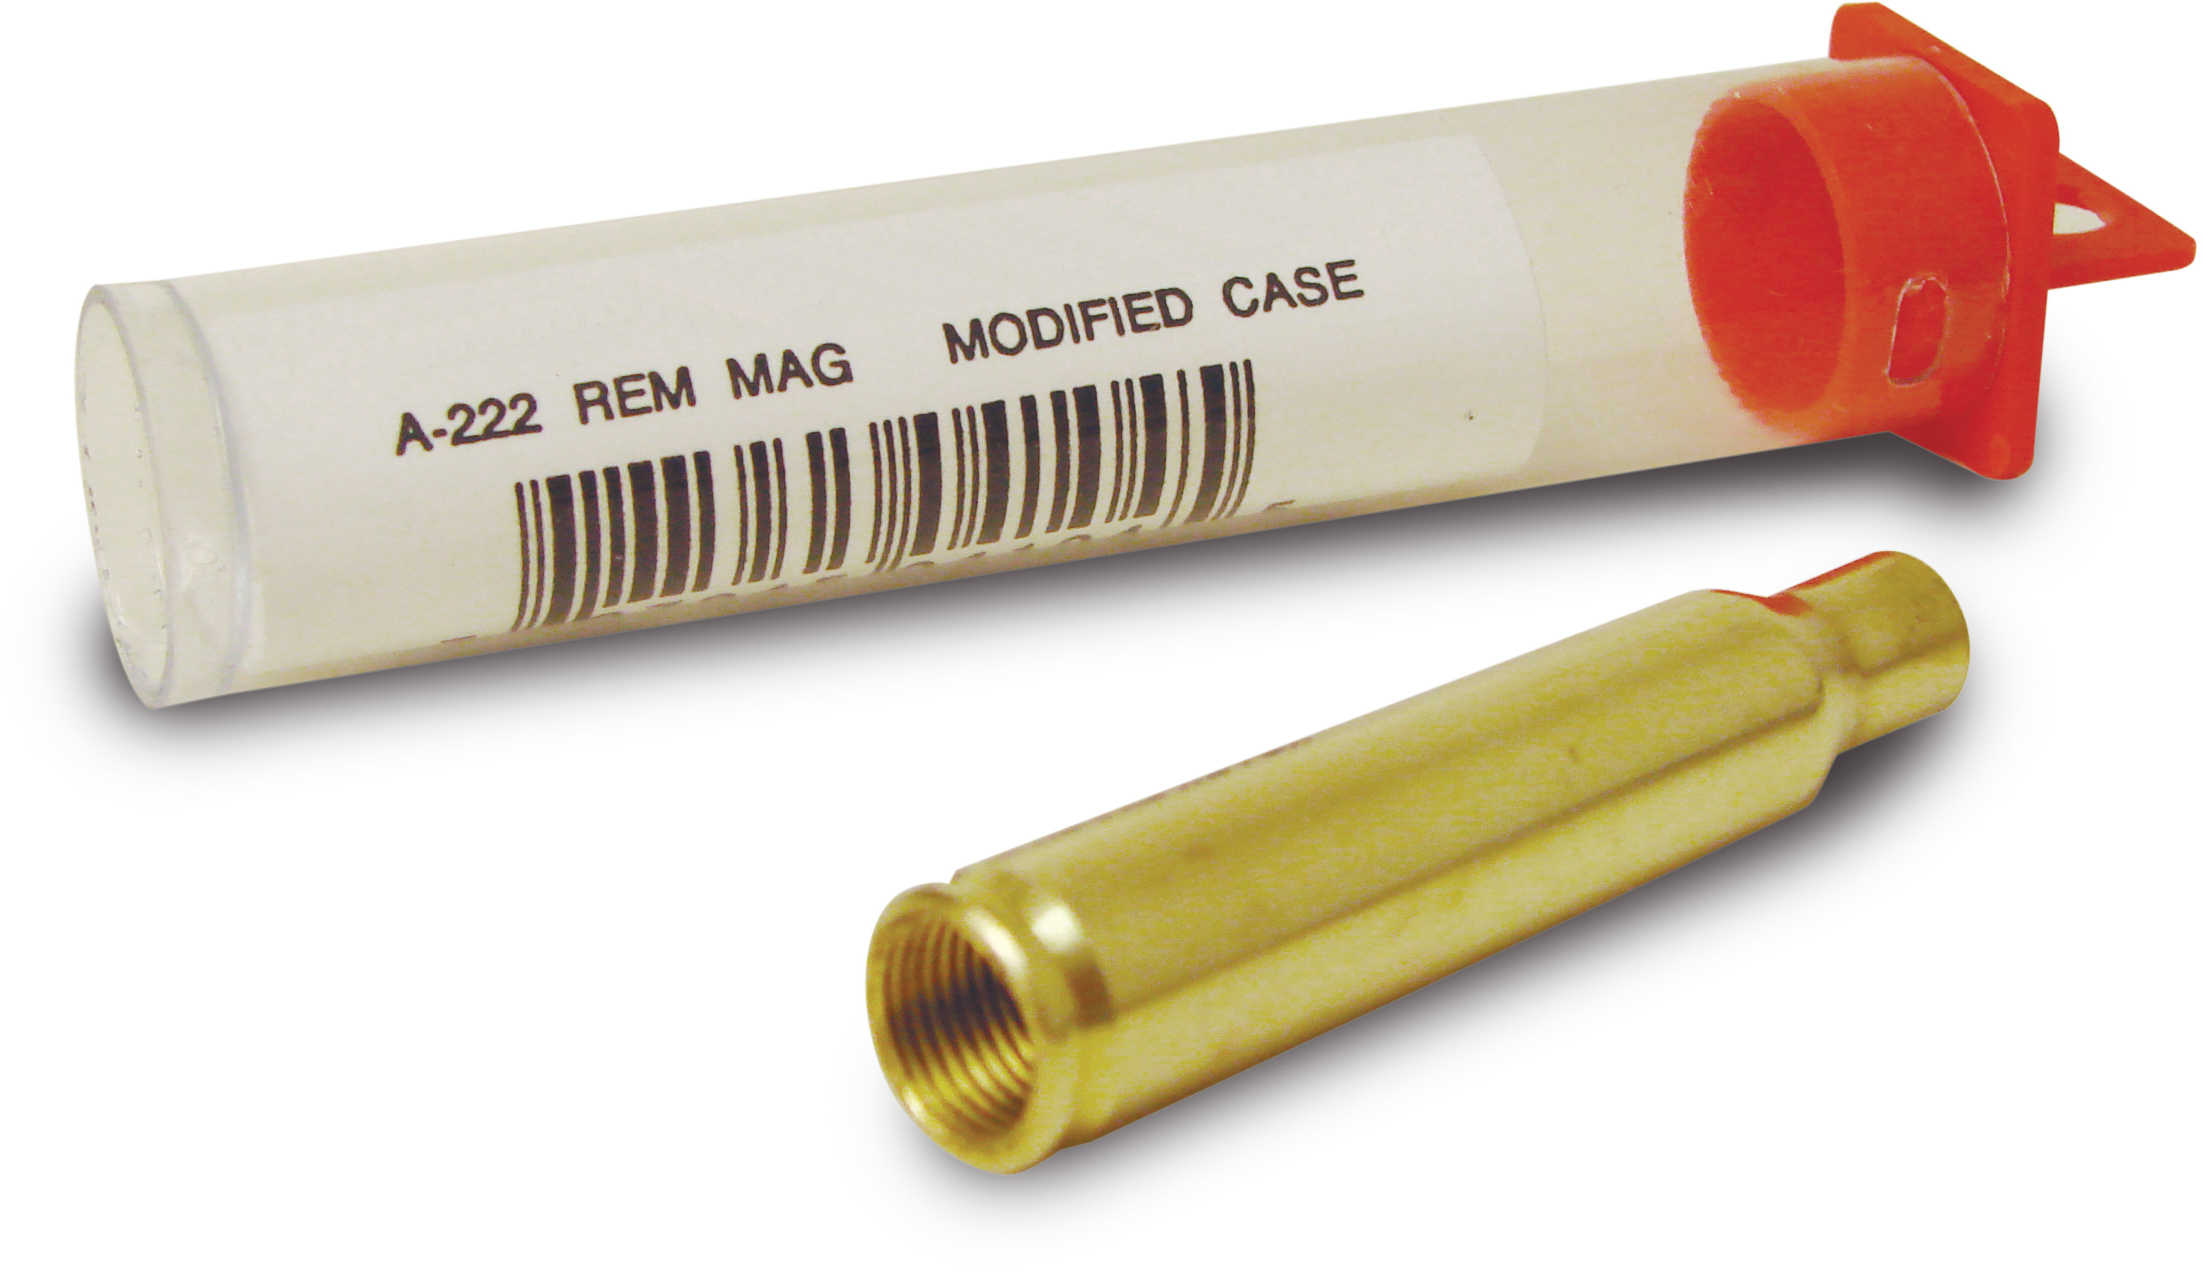 Hornady Lock-N-Load 30-378 Weatherby Modified Case, 1 Count Md: C30378